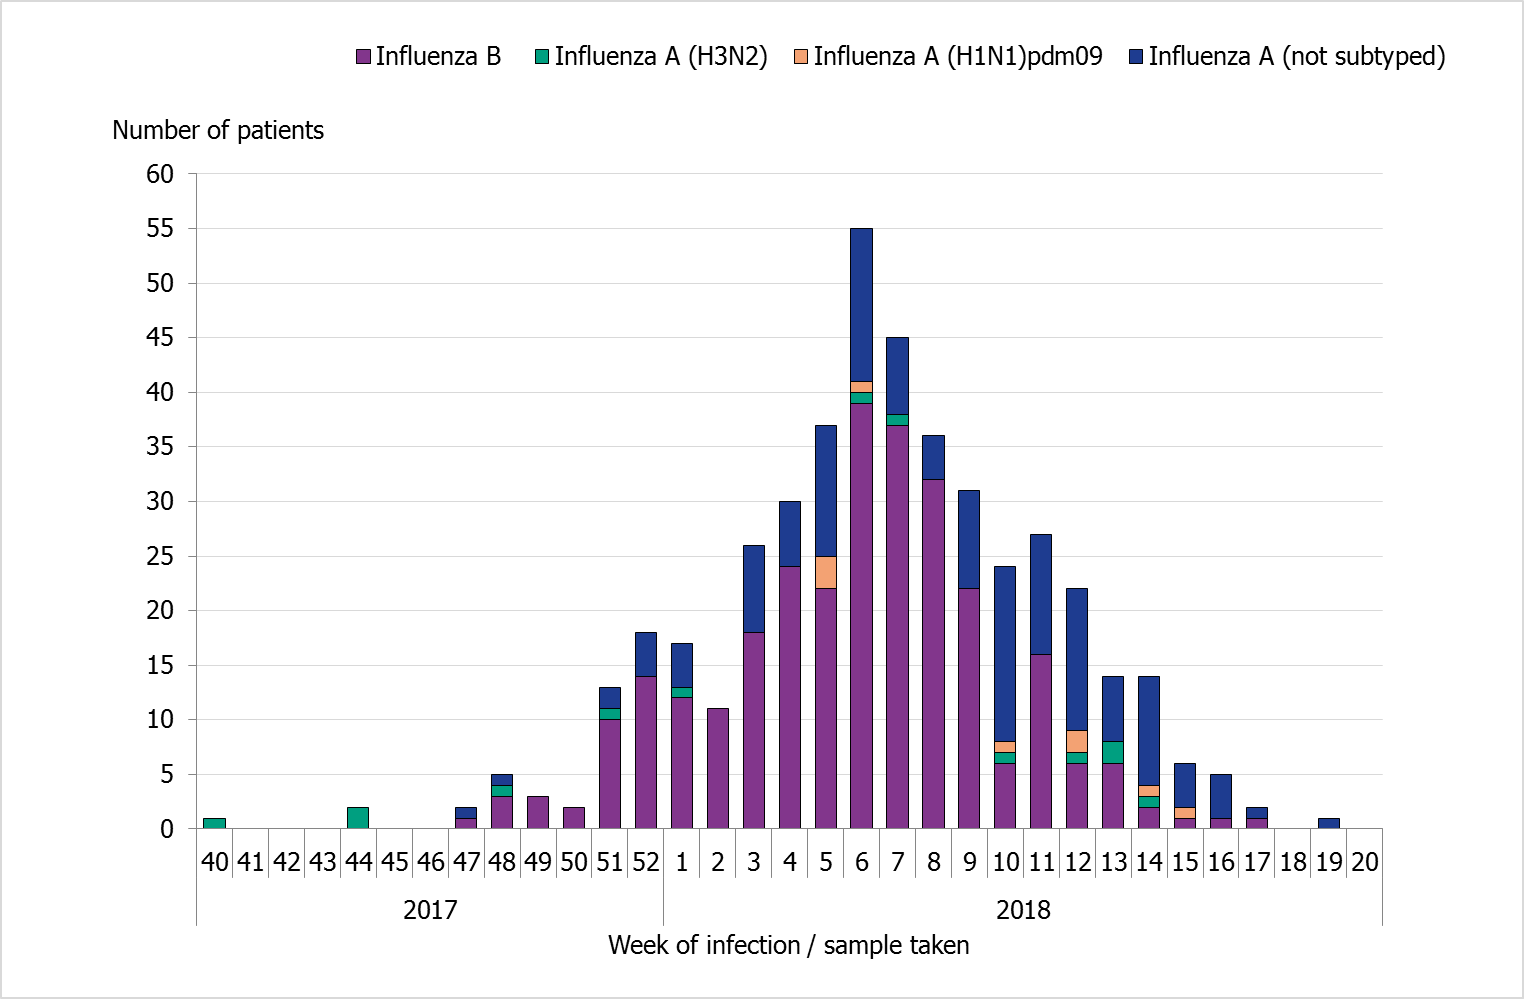 Number of patients with influenza in intensive care by influenza type and number of laboratory-confirmed cases, 2017–2018 season. The largest bars are by far influenza B, followed by influenza A, not subtyped. 